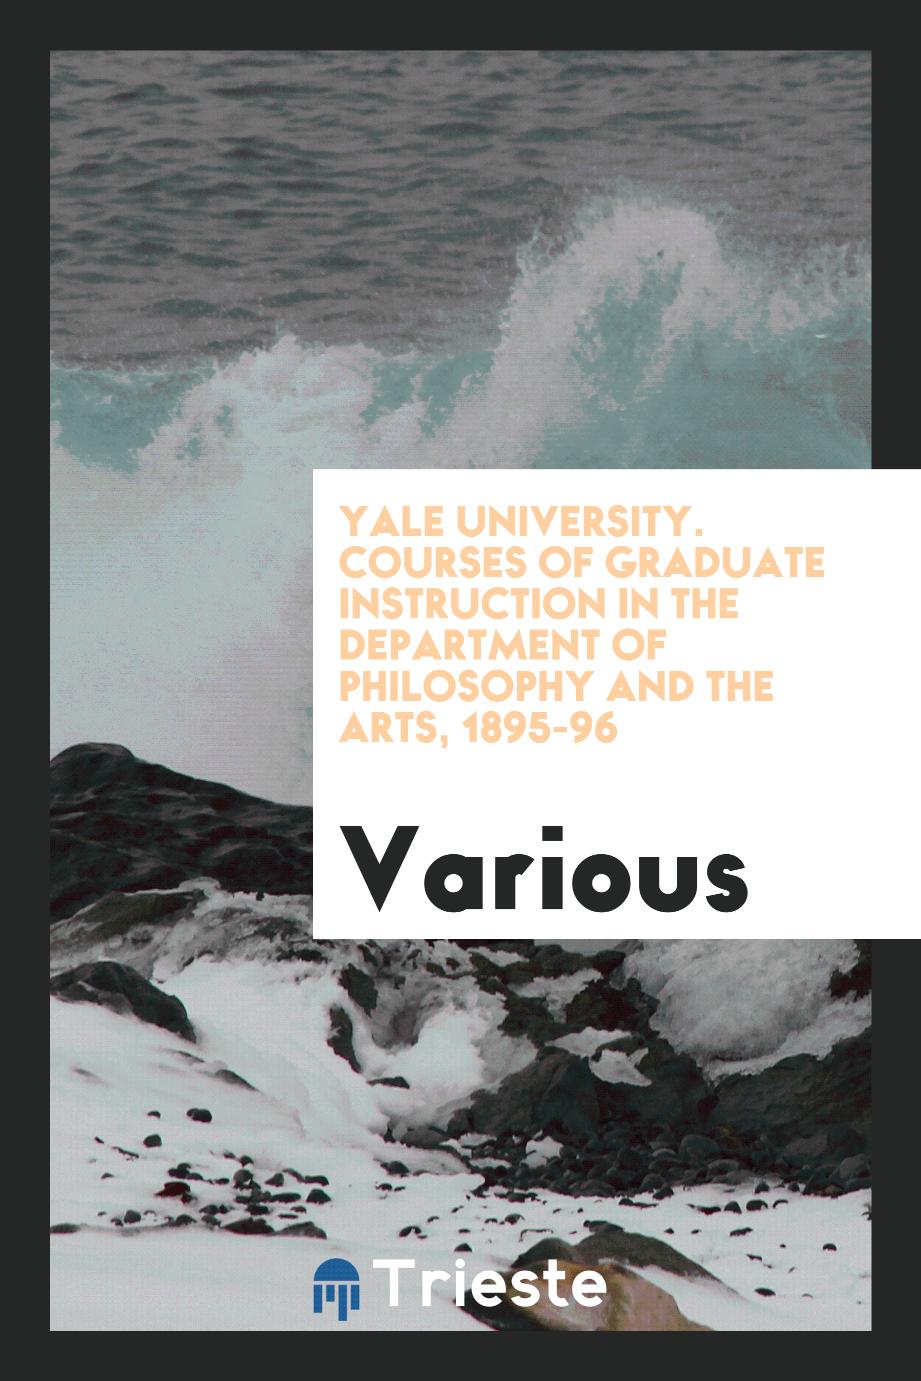 Yale University. Courses of Graduate Instruction in the Department of Philosophy and the Arts, 1895-96